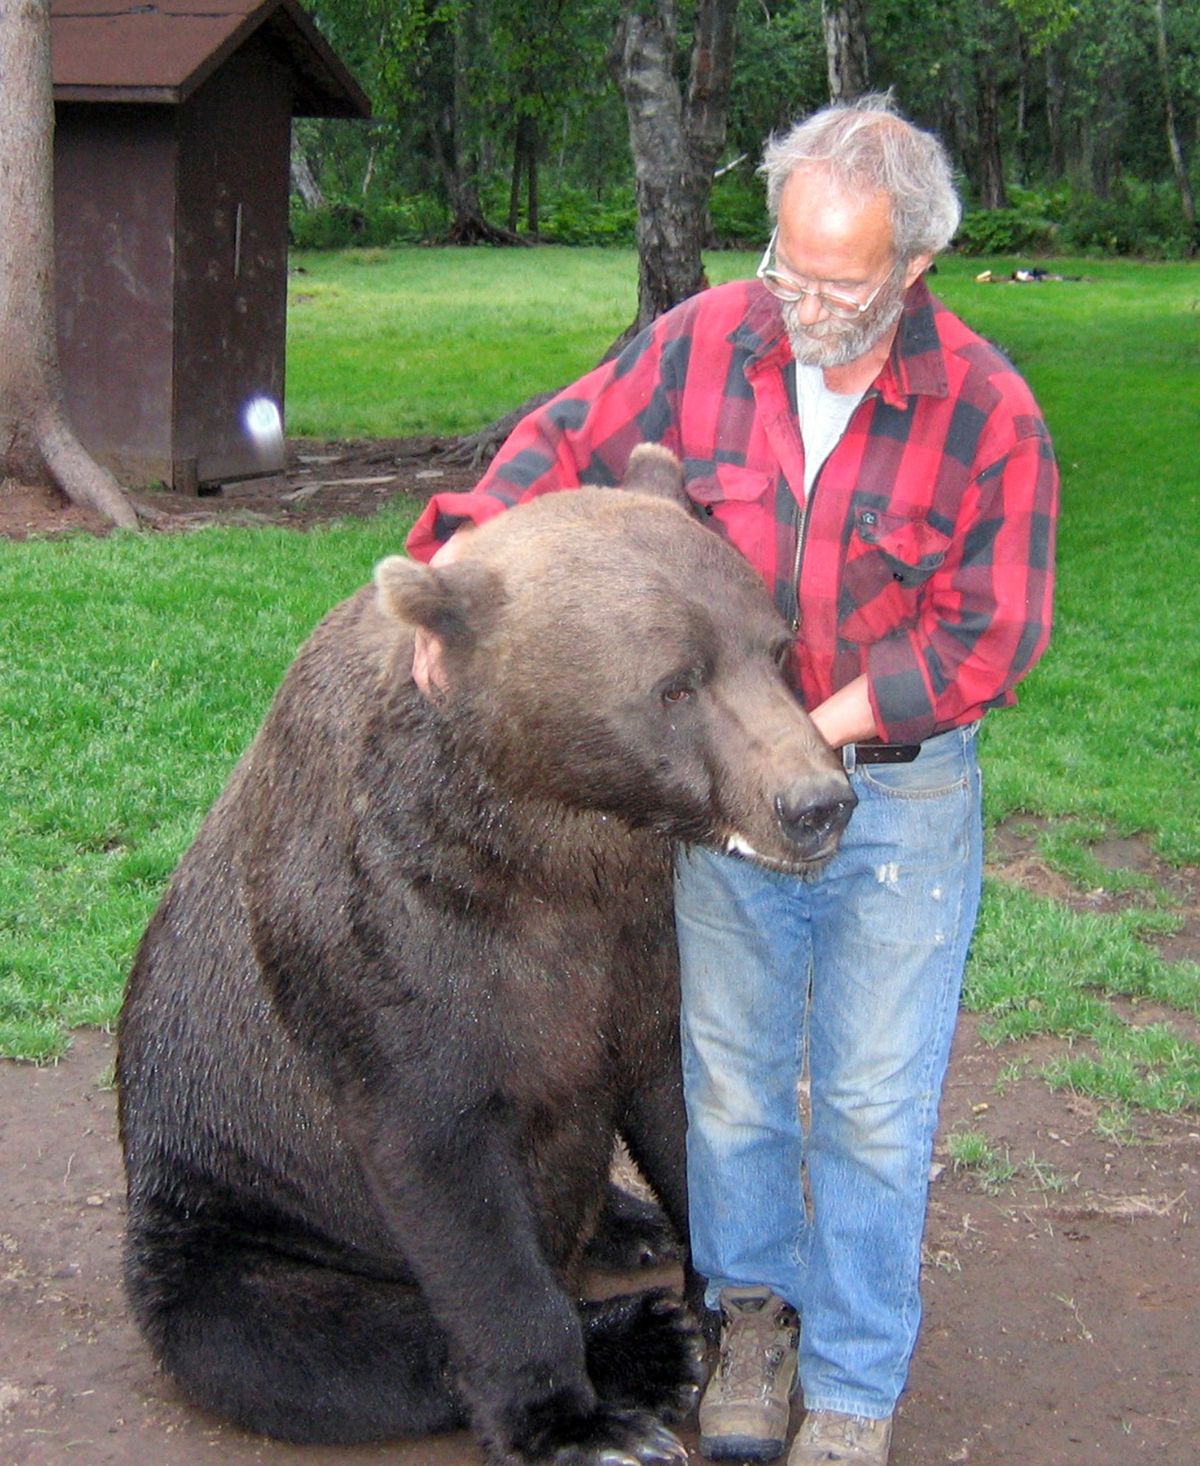 This undated photo released by the Alaska Department of Fish and Game shows Charlie Vandergaw with a brown bear. (The Spokesman-Review)